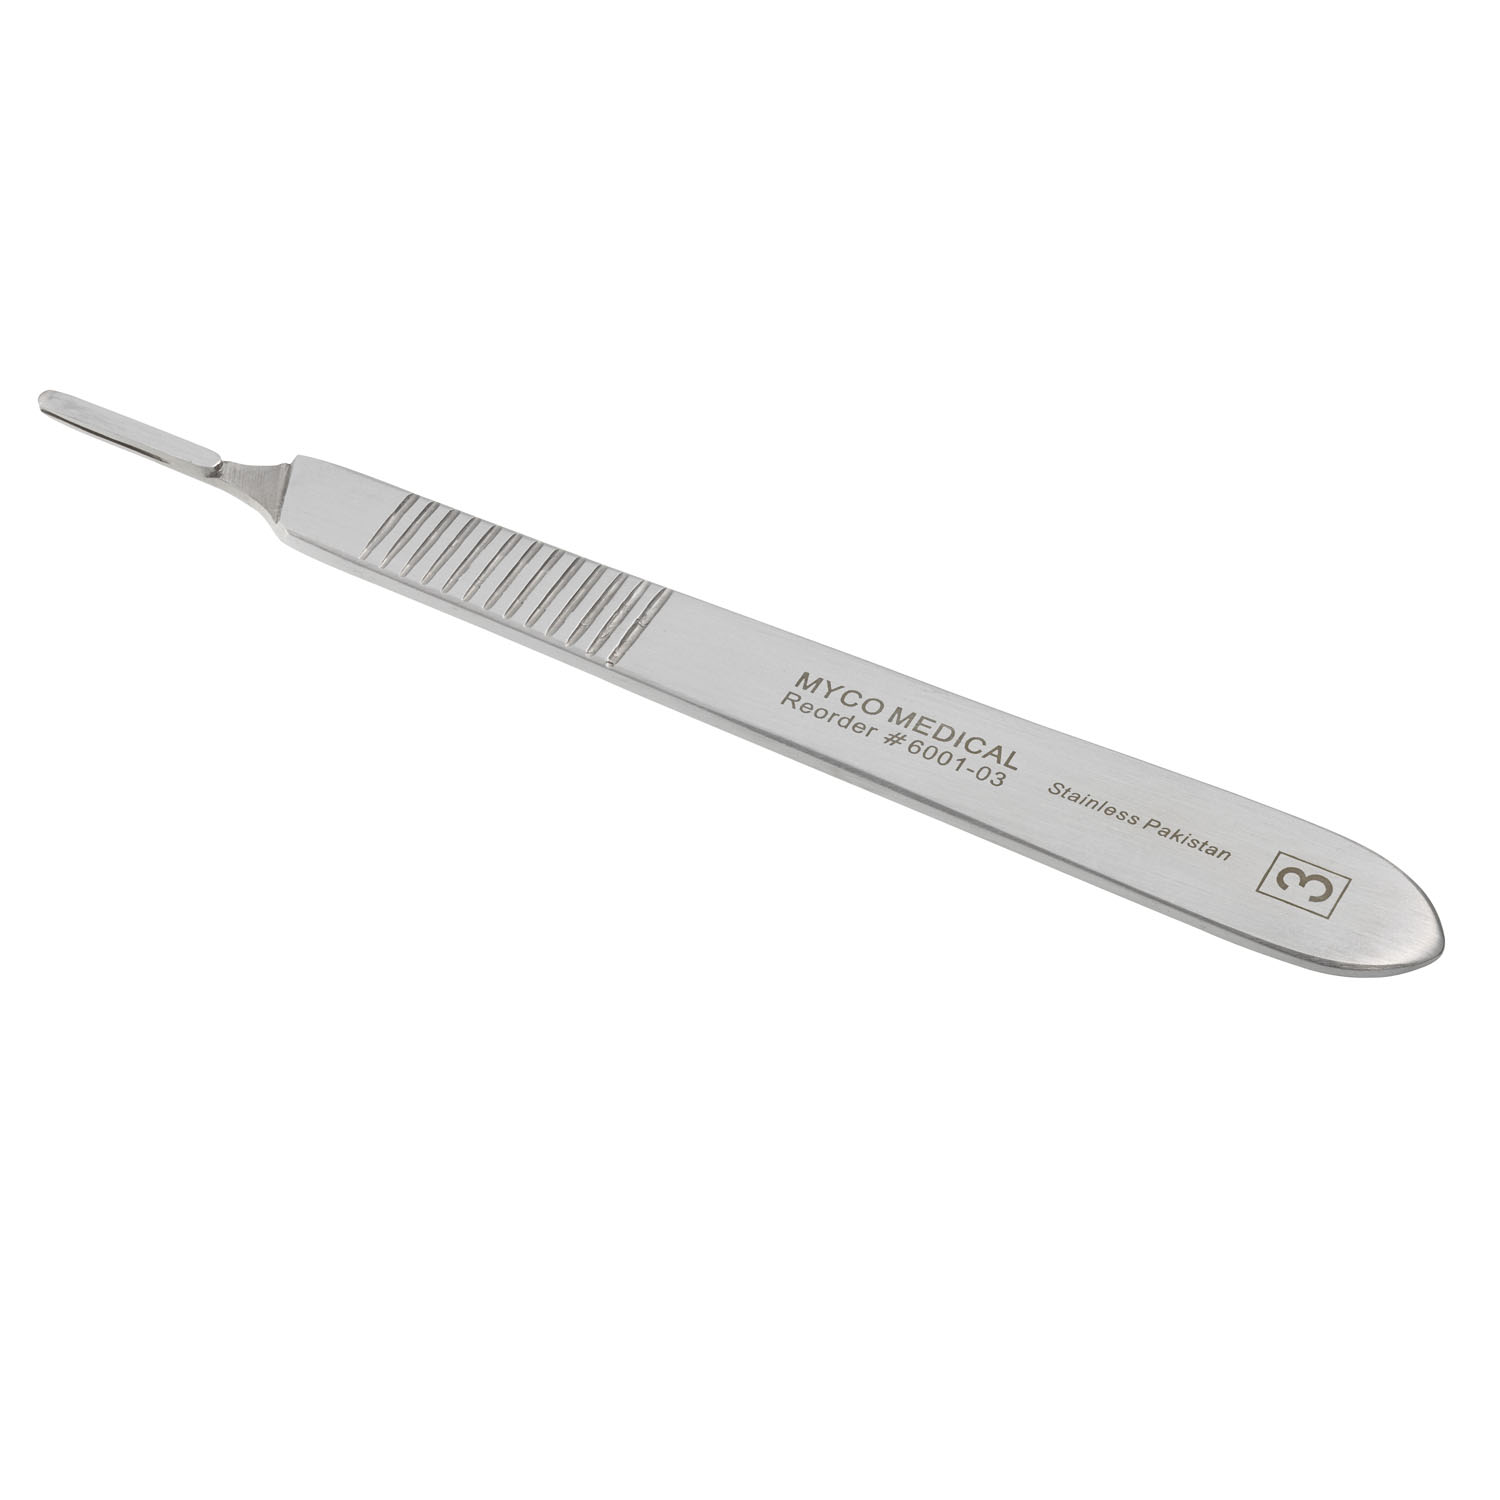 MYCO STAINLESS STEEL BLADE HANDLES : 6001-03 BX $65.45 Stocked